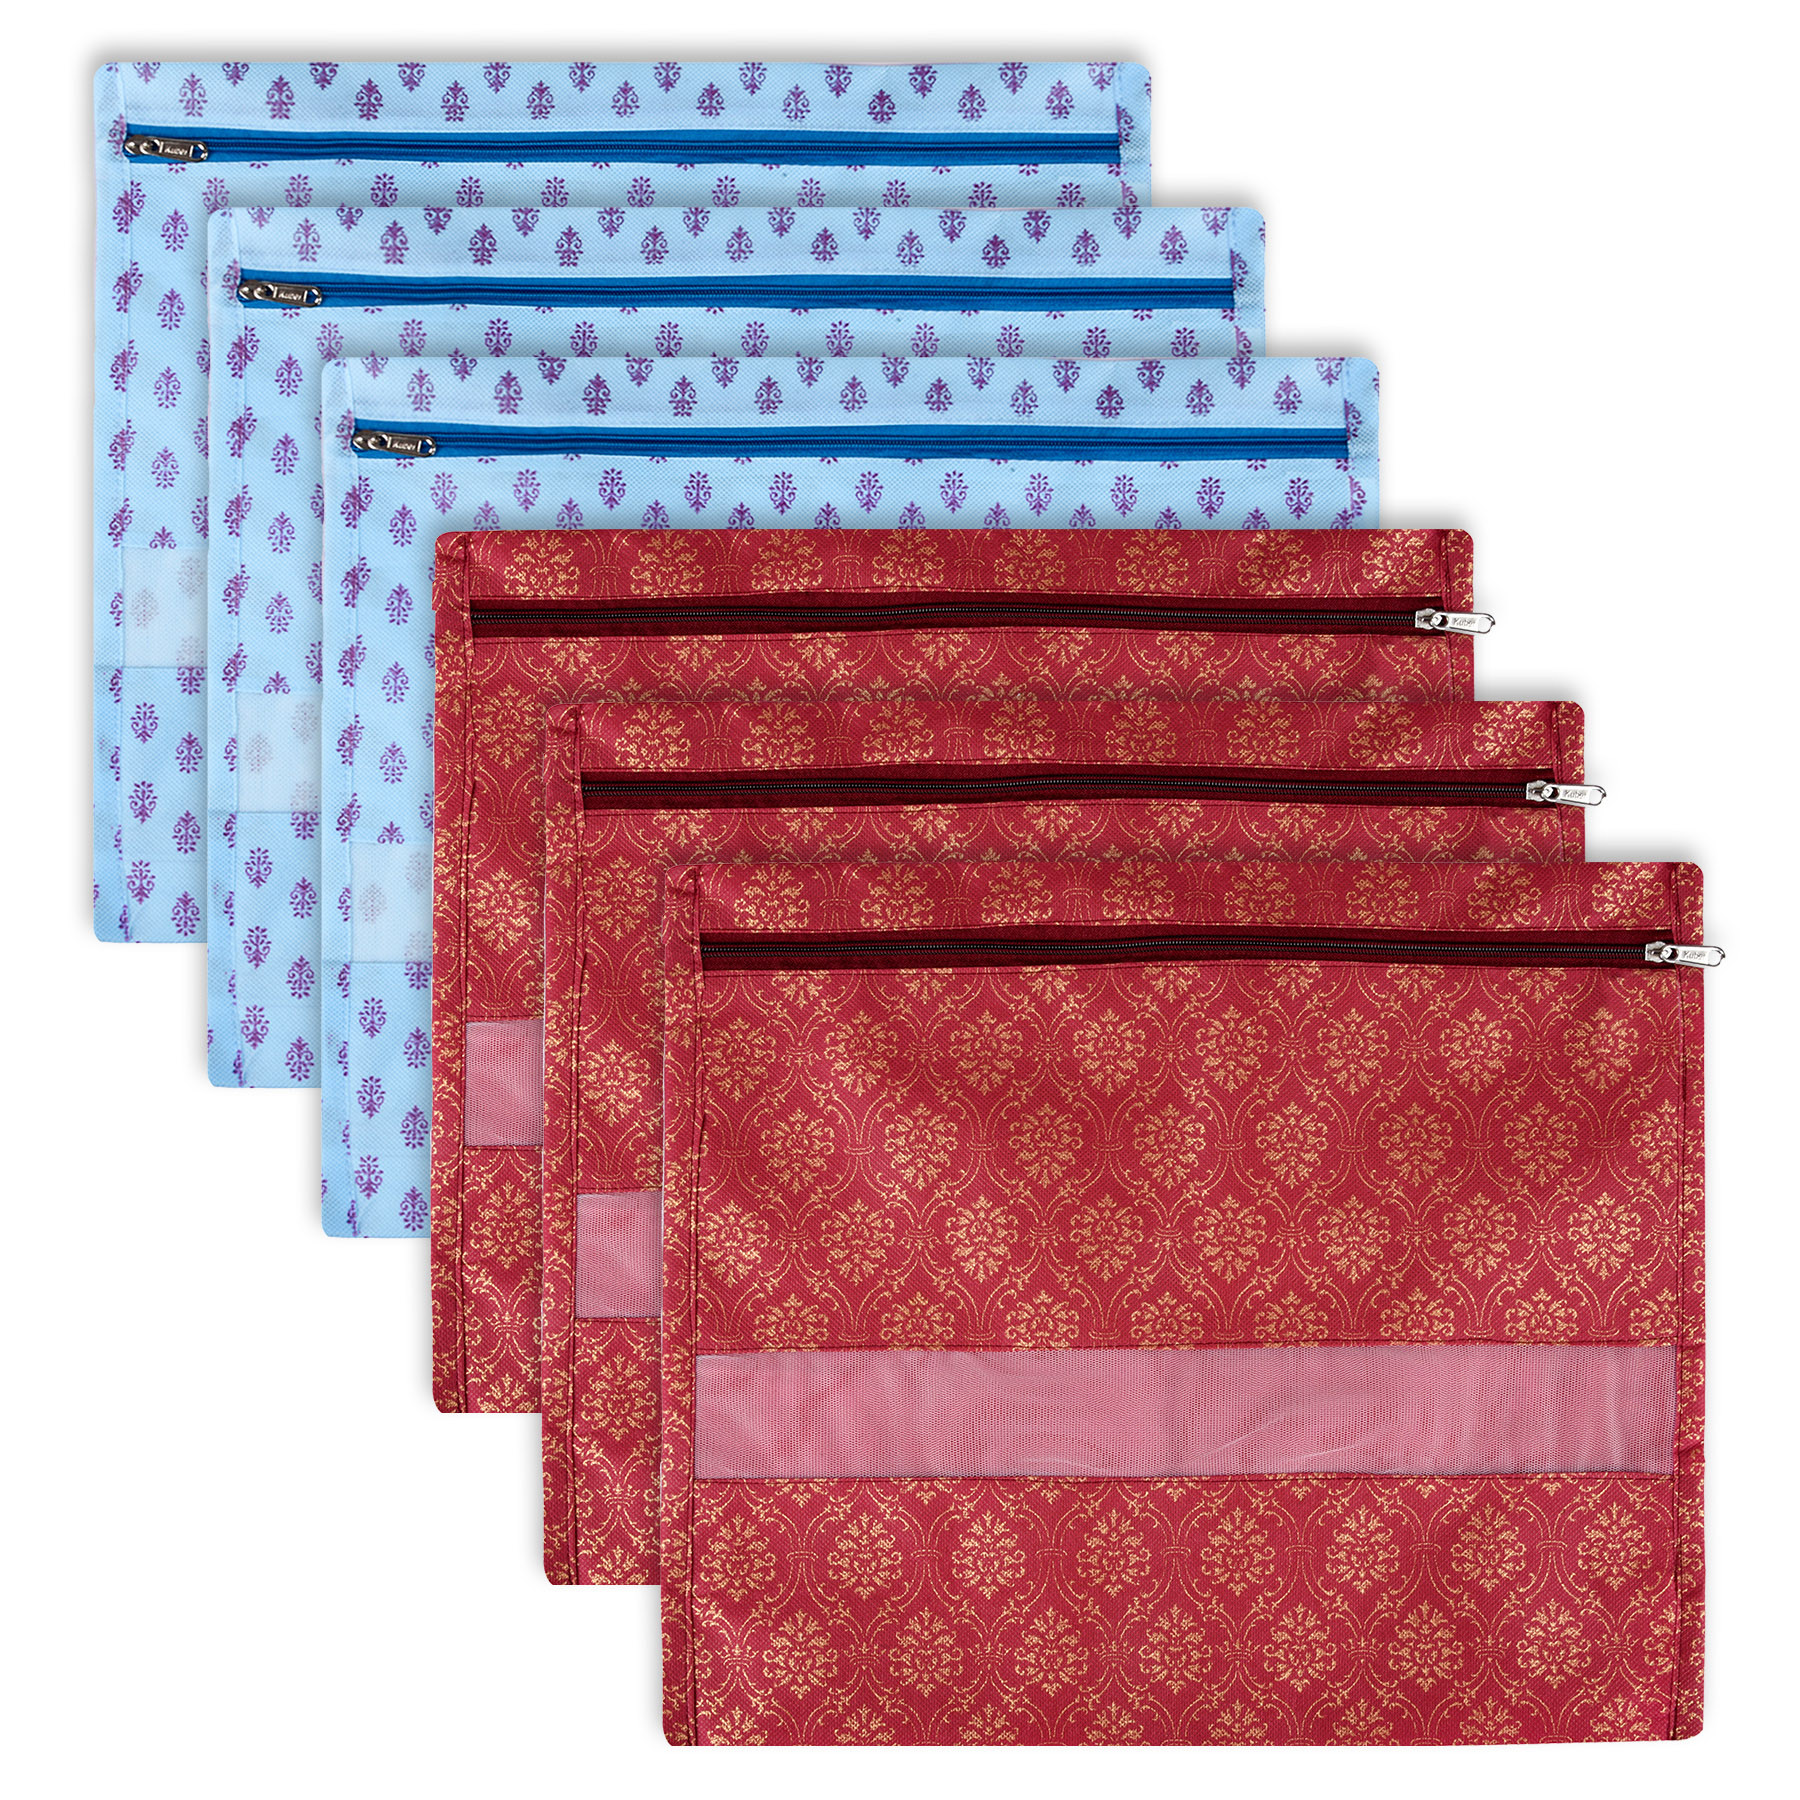 Kuber Industries Saree Bags | Clothes Bags for Storage | Non-Woven Wardrobe Organizer | Mesh Window Cloth Storage Bags Set | Single Packing Saree Bags | Printed | Sky Blue & Maroon